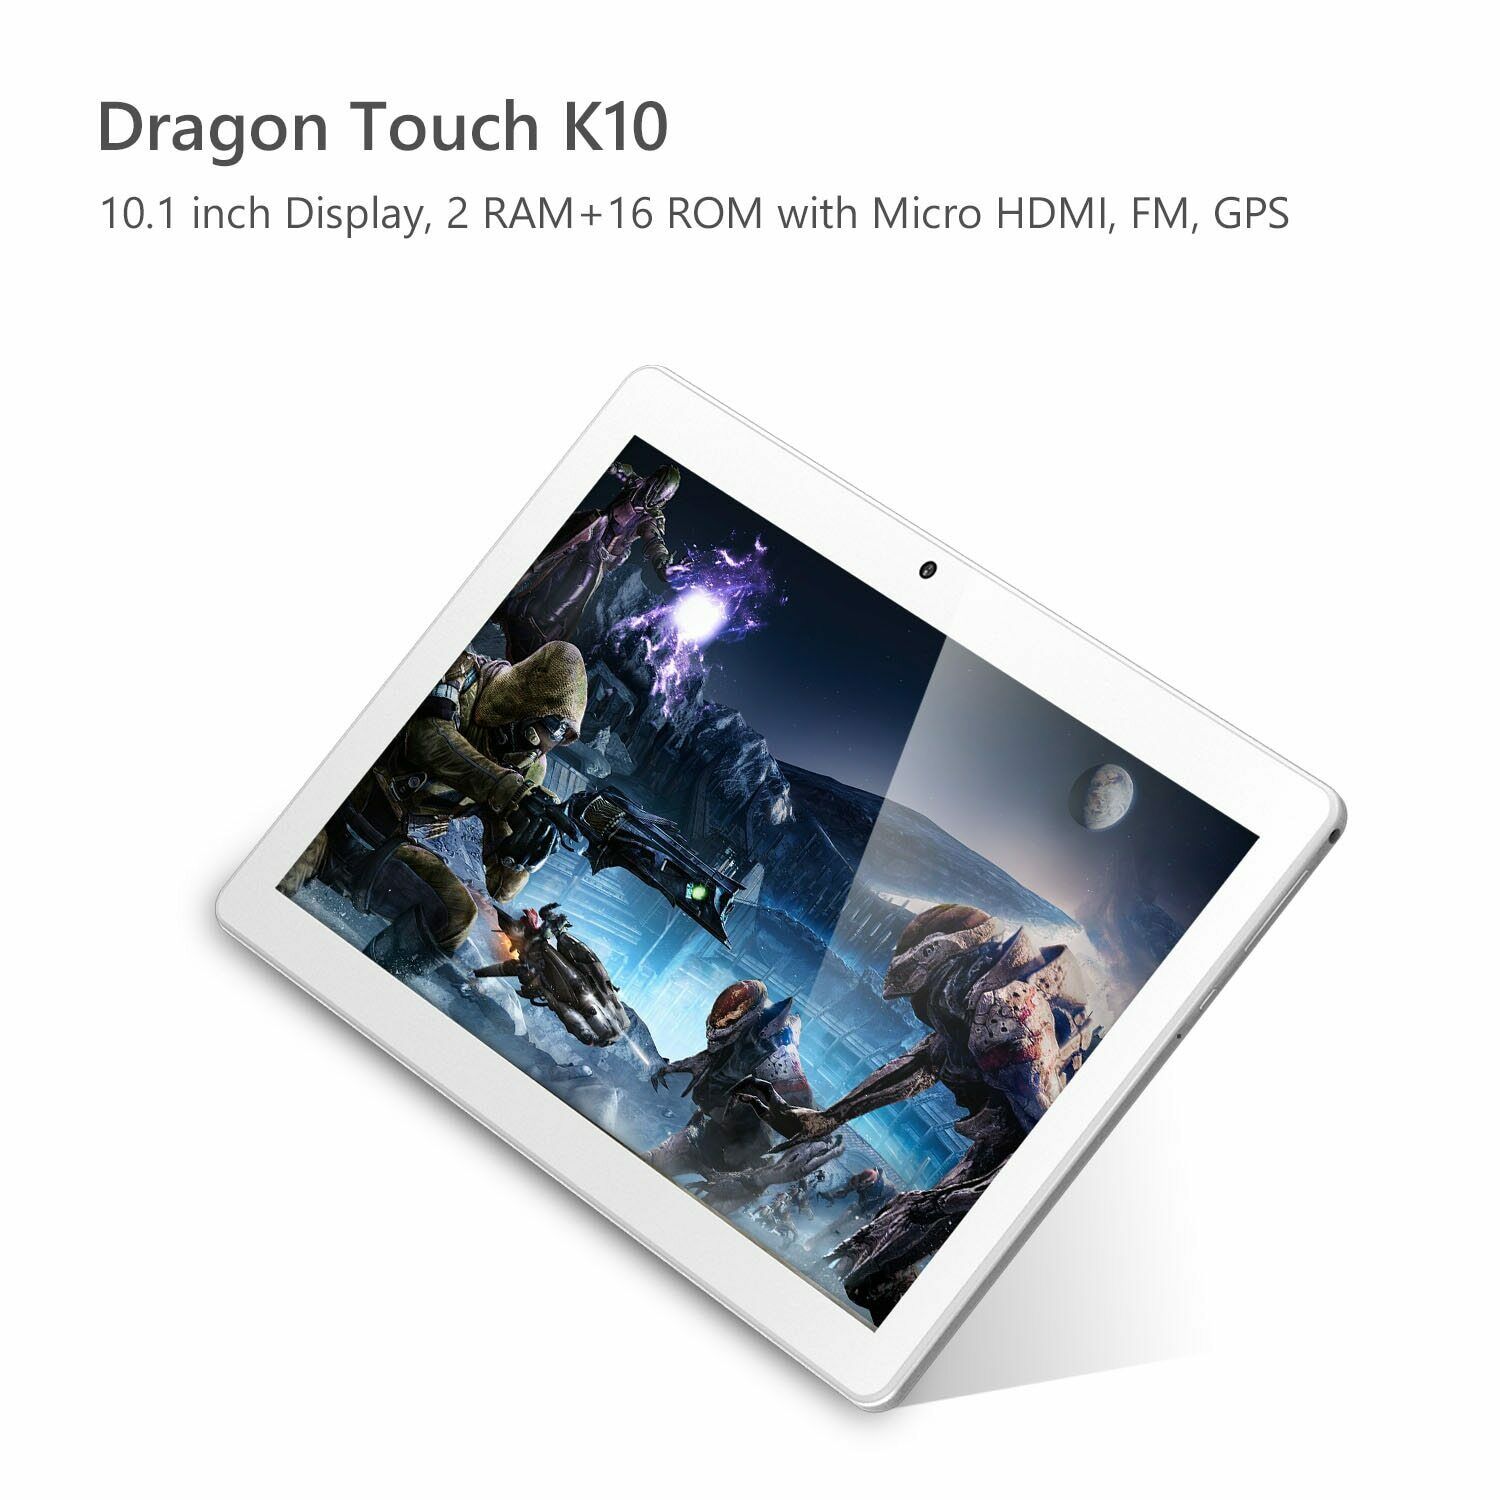 Dragon Touch K10 10.1" Quad Core Android Tablet 16GB WiFi HDMI GPS | Refurbished